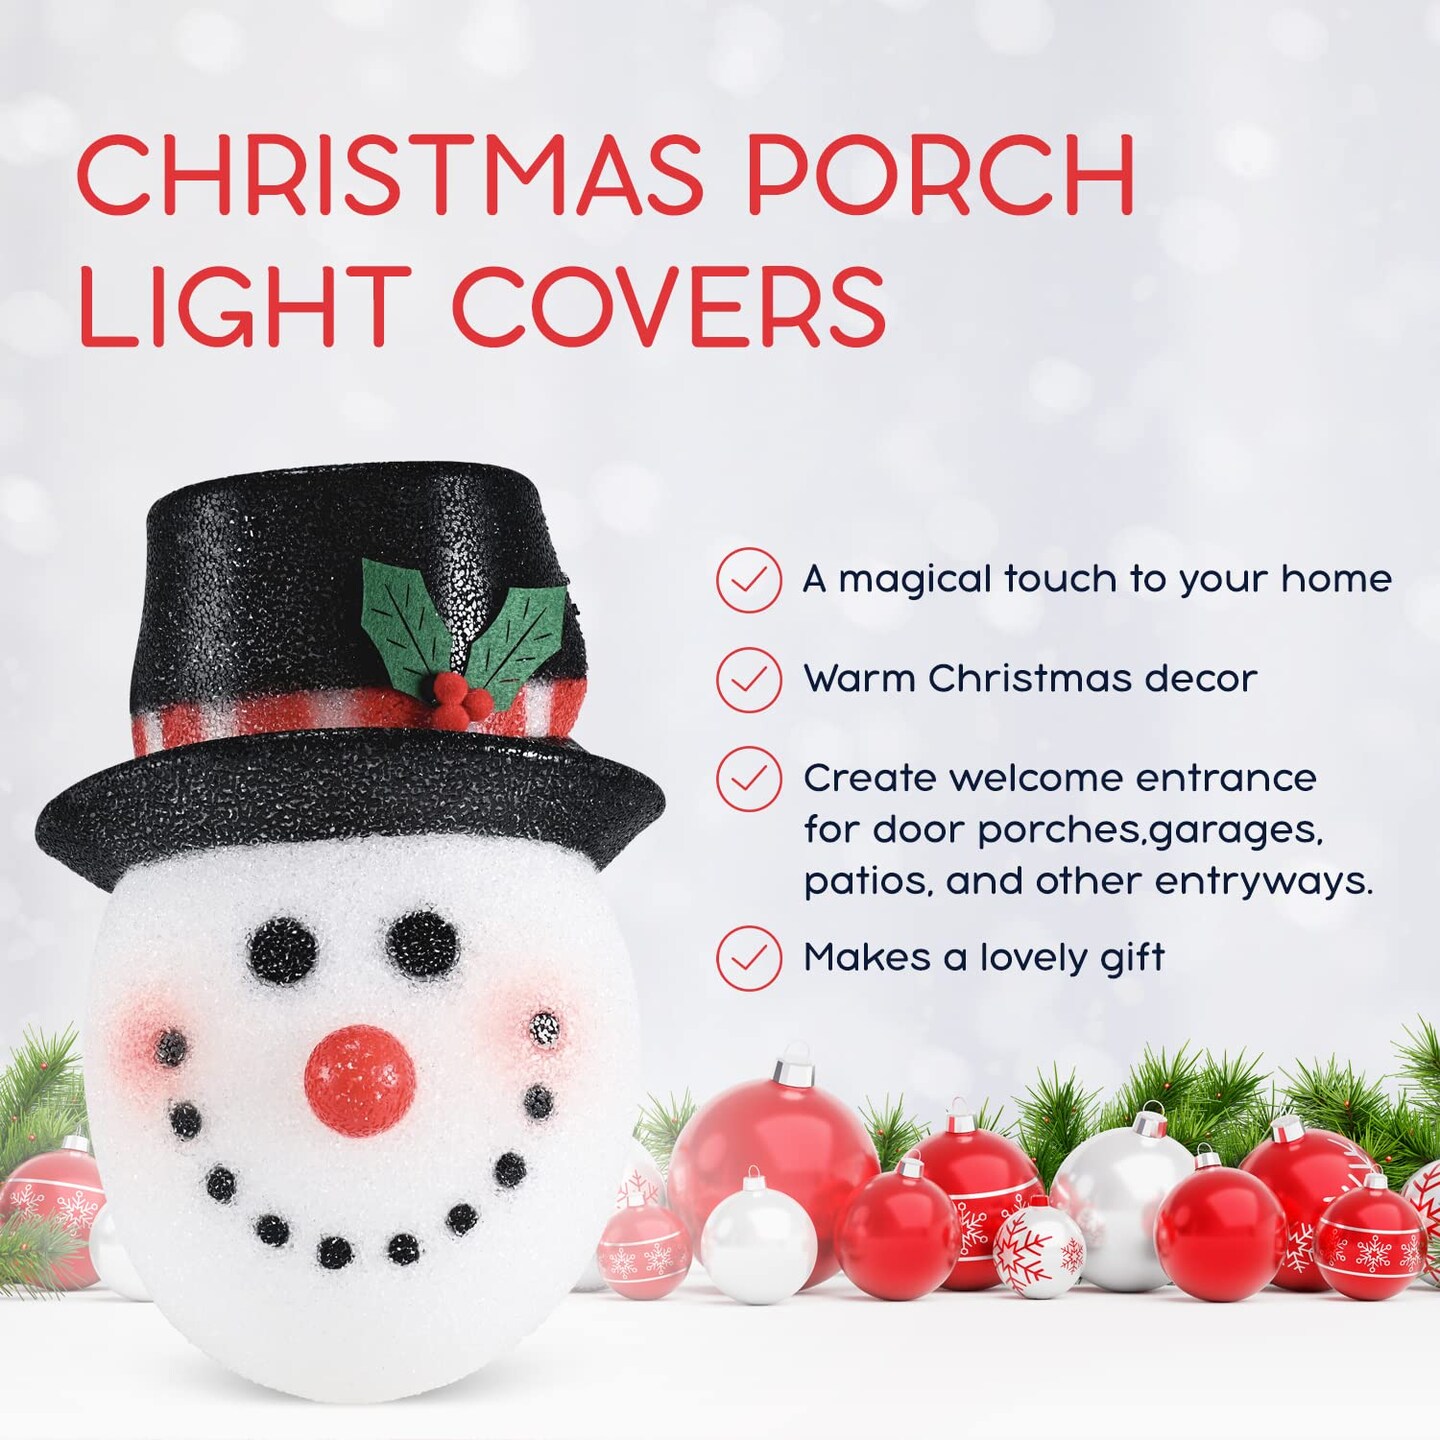 Ornativity Snowman Porch Light Cover - Snowman Head Outdoor Front Porch Lamp Holiday Decoration Covers - Set of 2